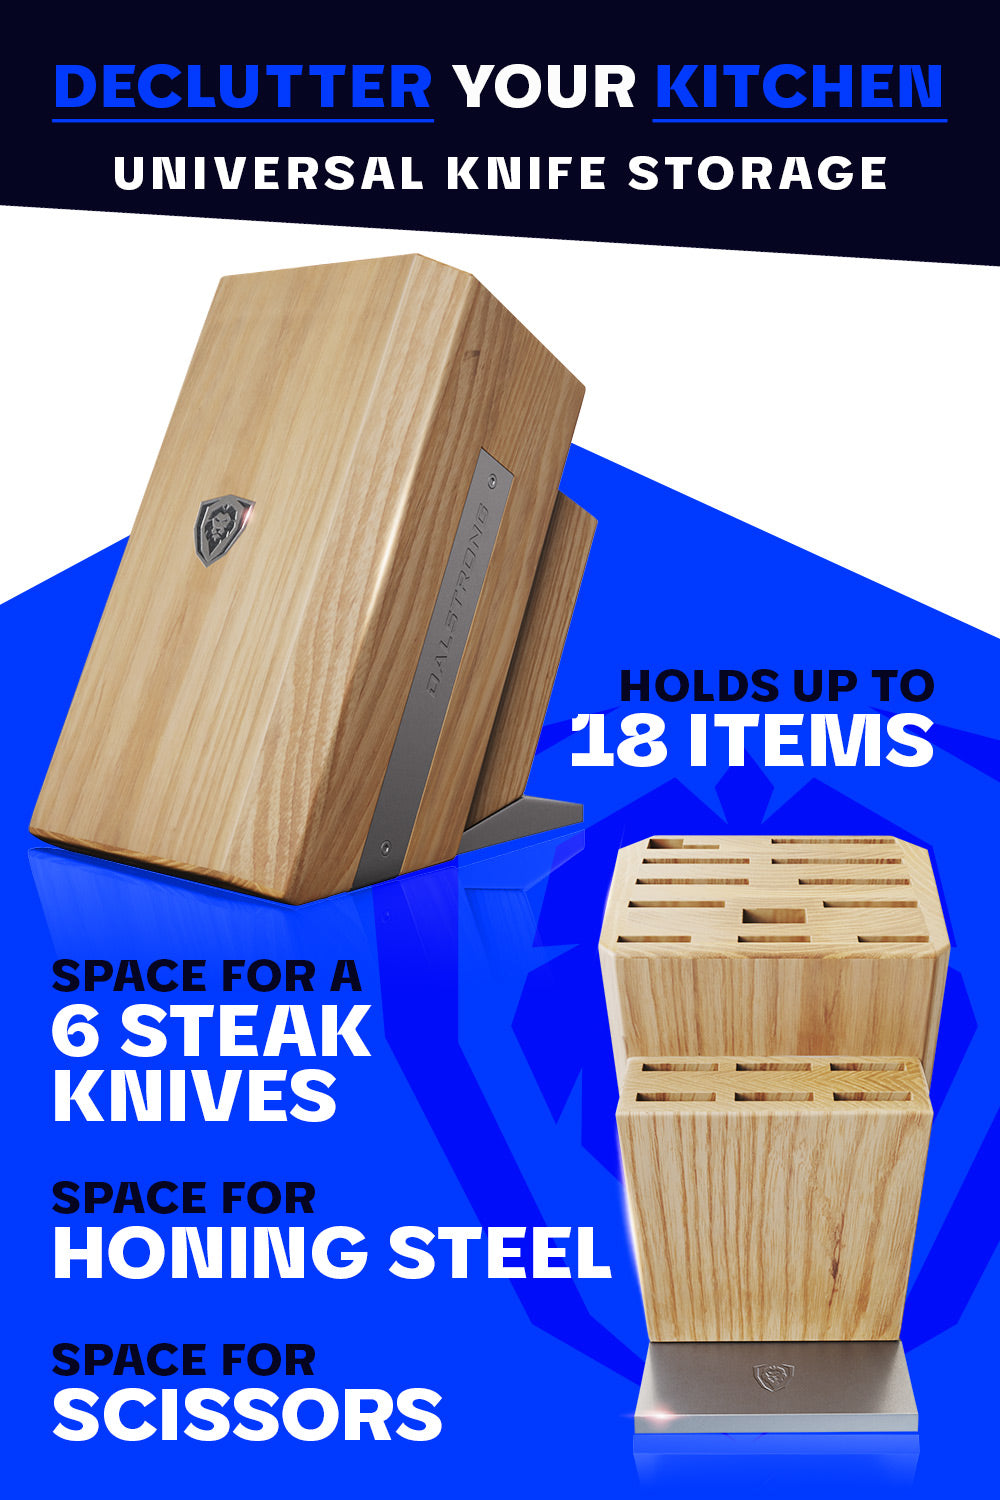 Need a Knife Block Without Knives? Say Less! – Dalstrong